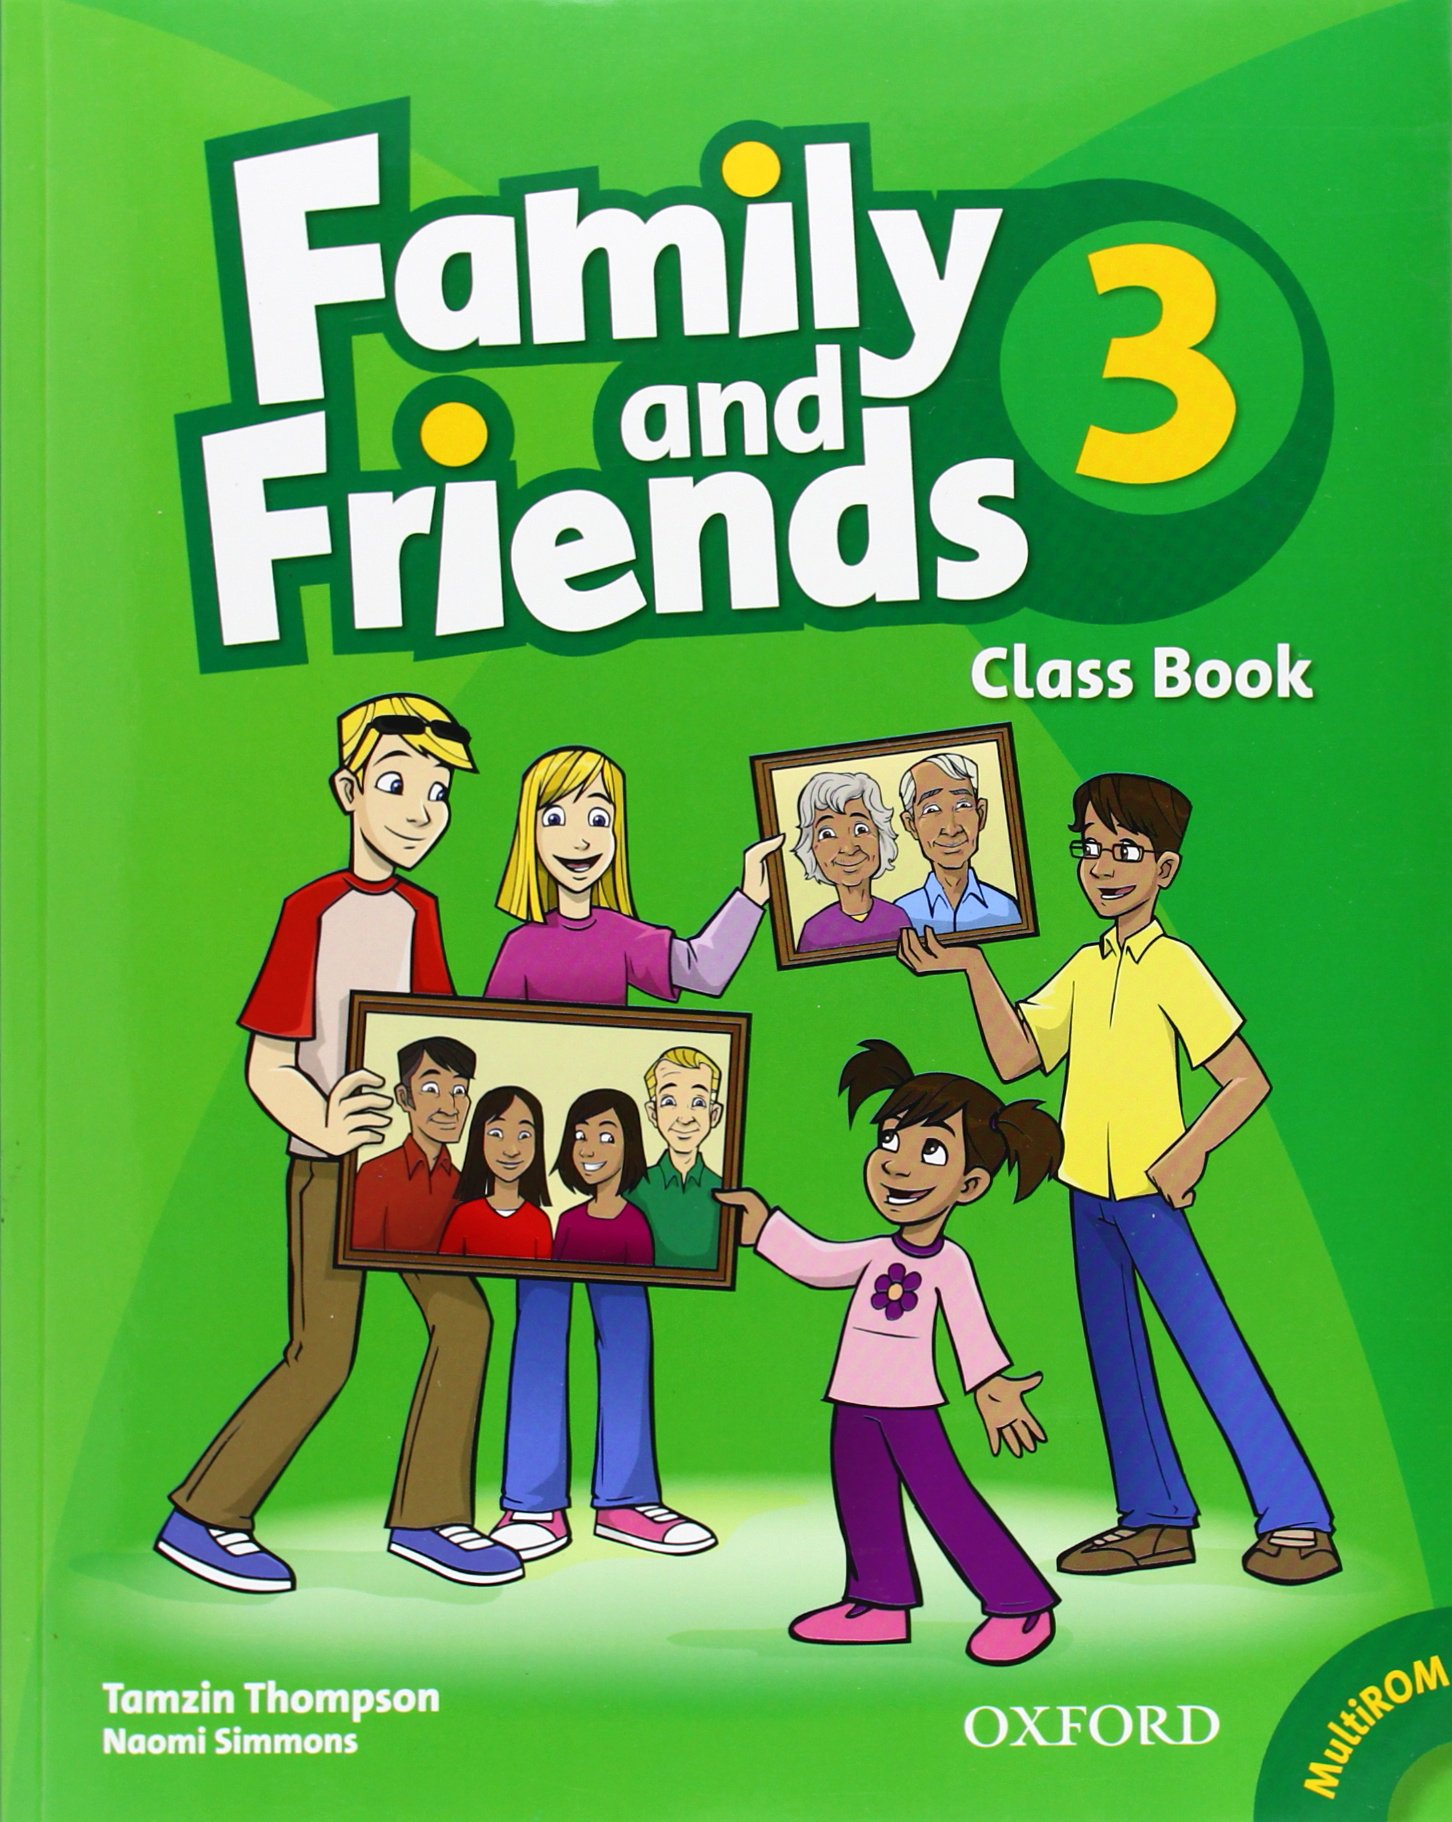 Family & friends book collection